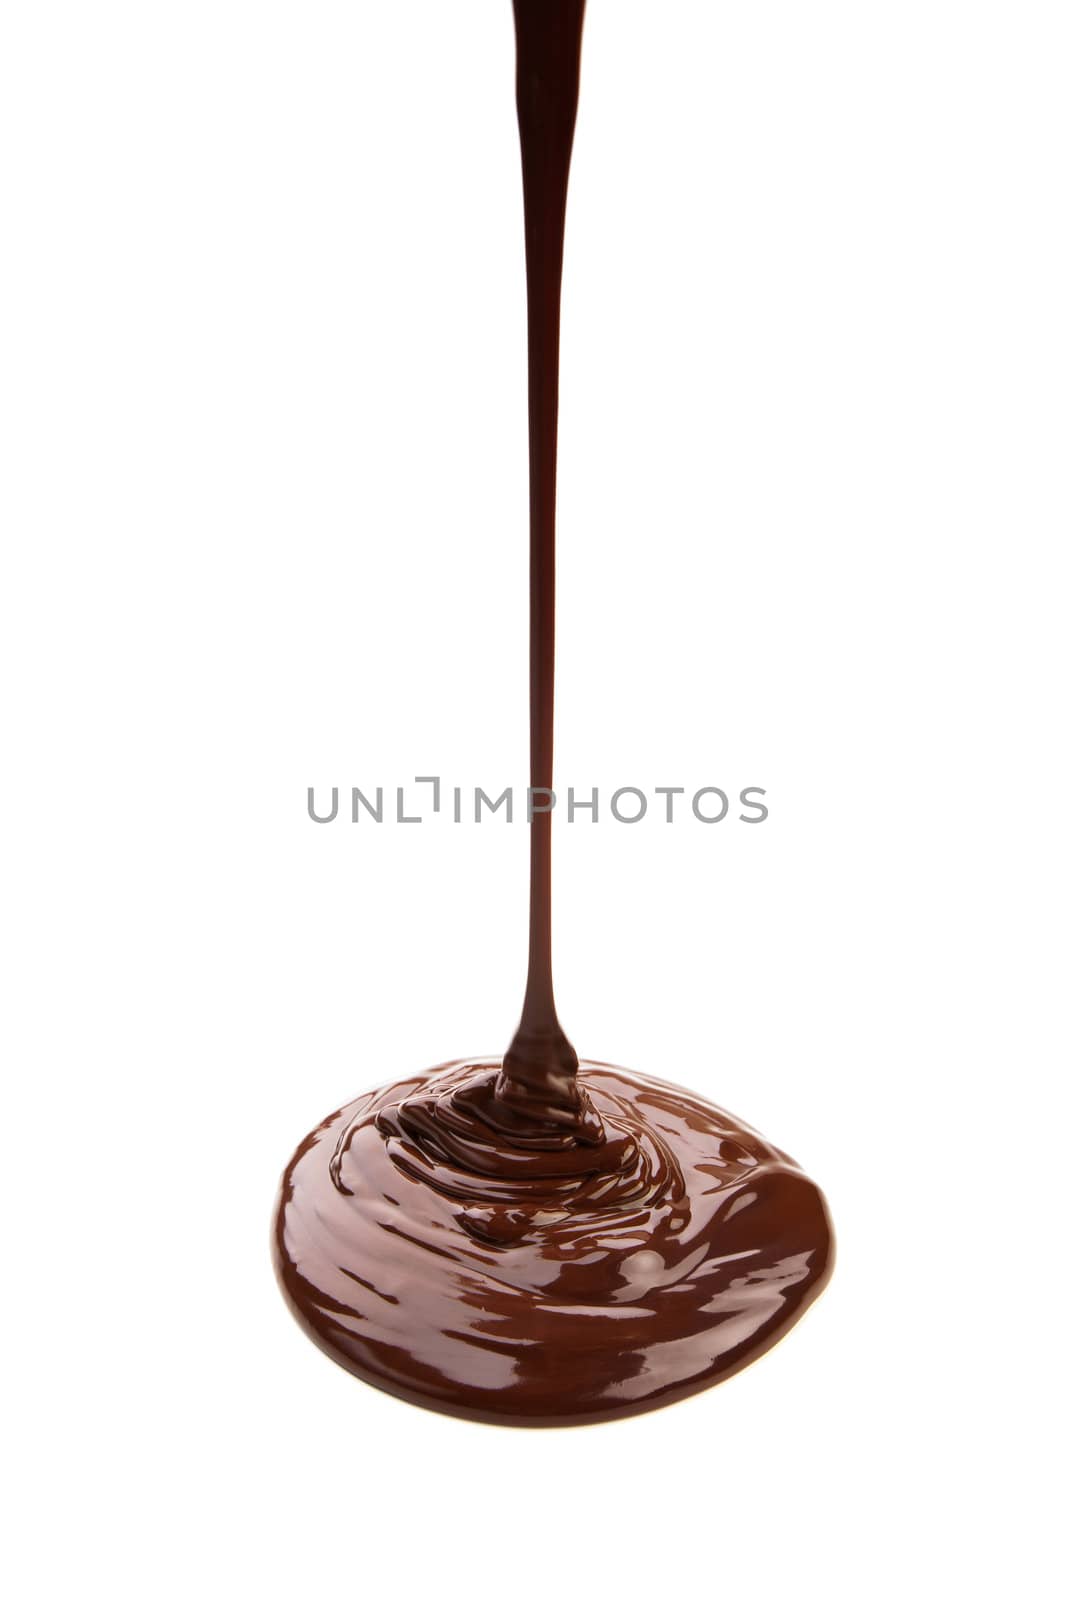 Melted chocolate flowing on chocolate plates isolated on white background